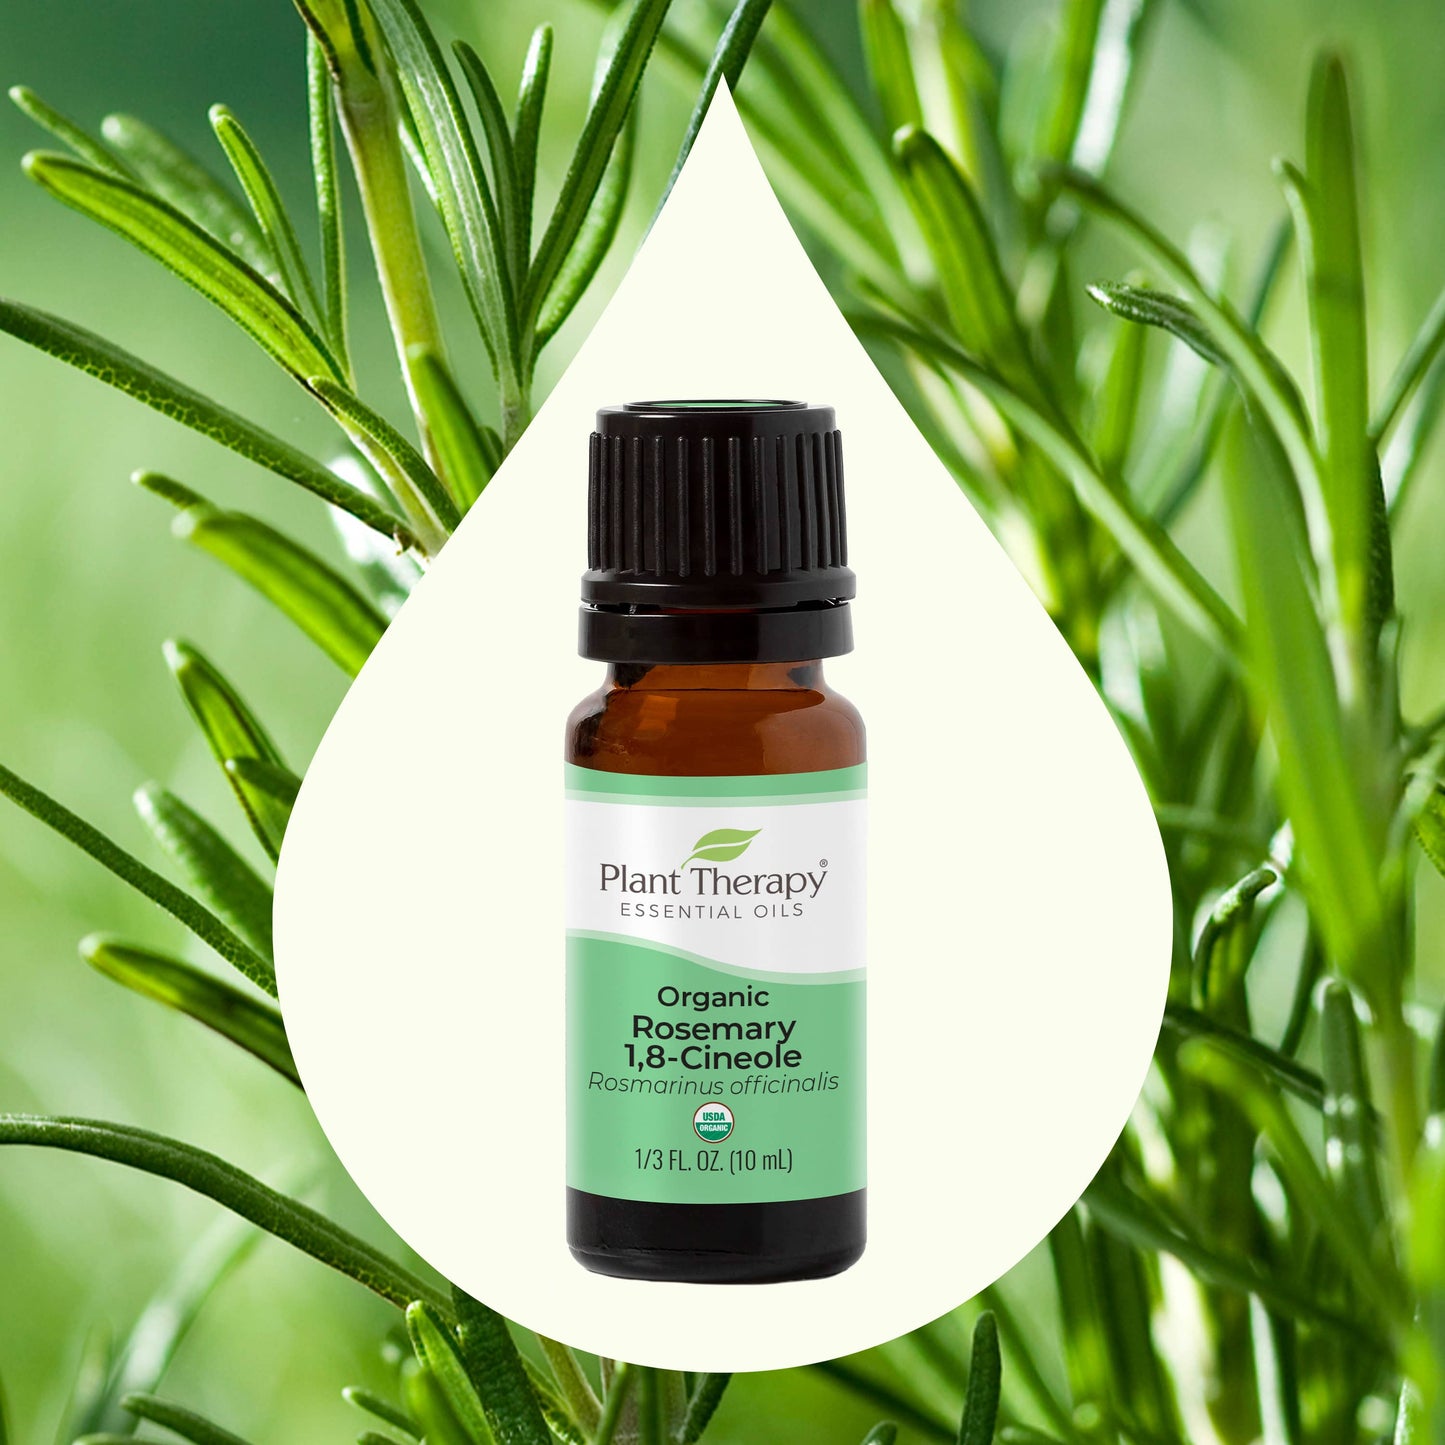 Organic Rosemary 1,8-Cineole Essential Oil front label